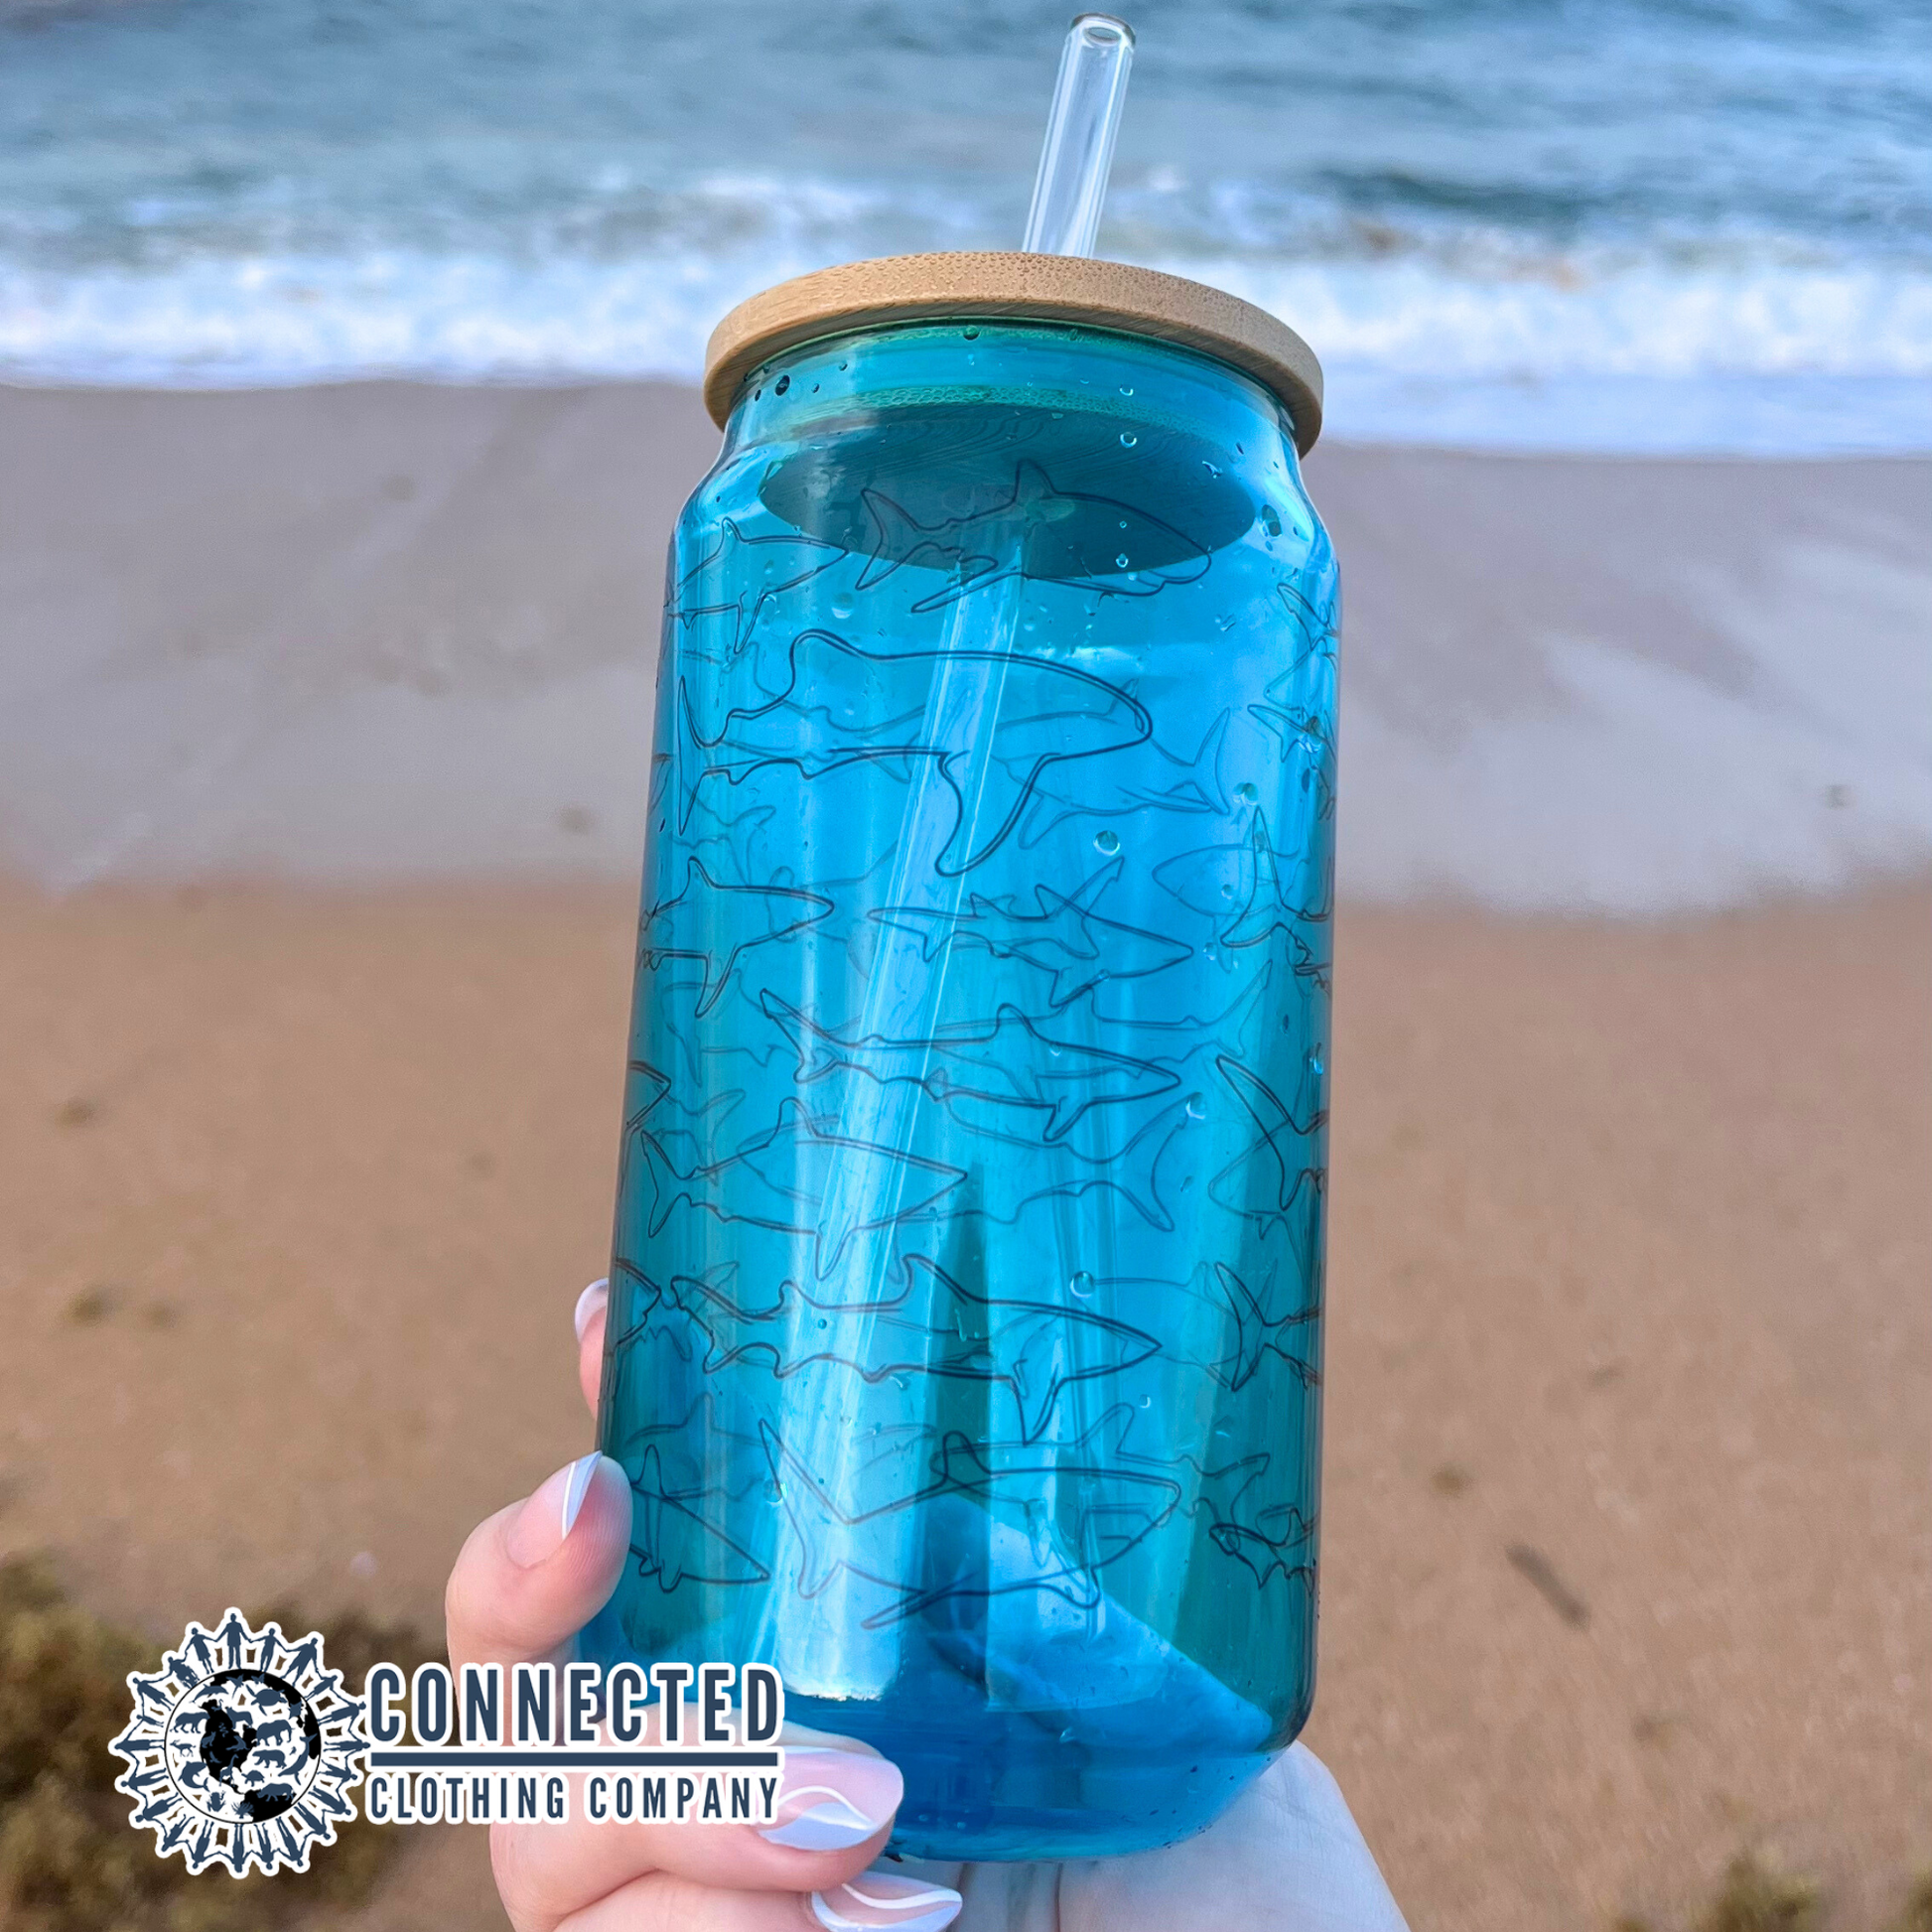 Shark Species Clear Blue Glass Can - Connected Clothing Company - 10% of proceeds donated to ocean conservation